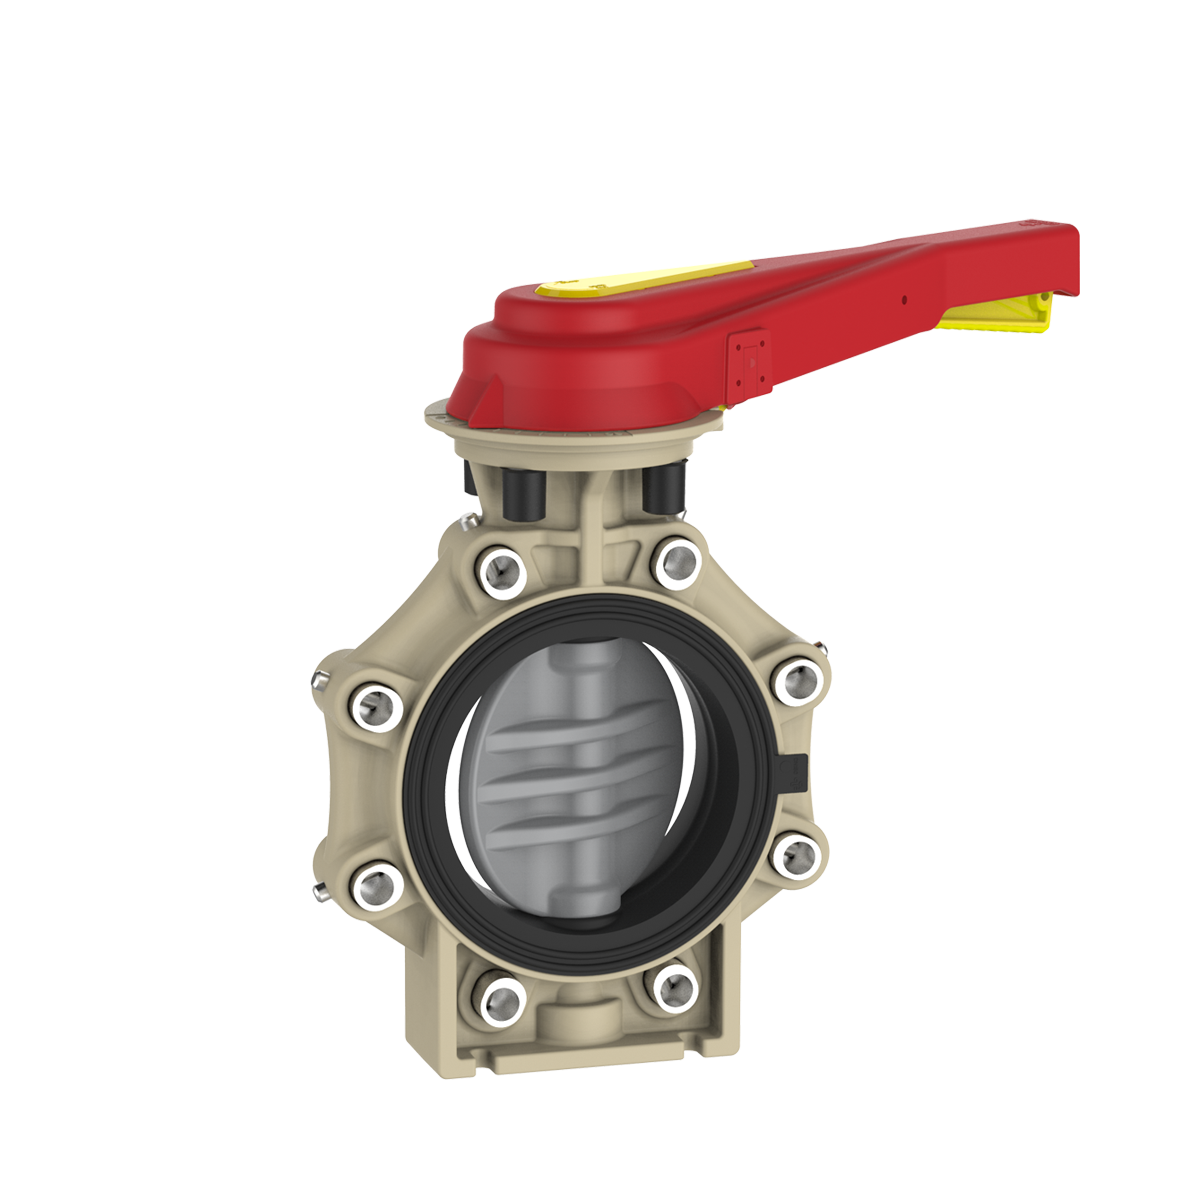 Praher K4 Series Butterfly Valve w/lever op (lugged style)